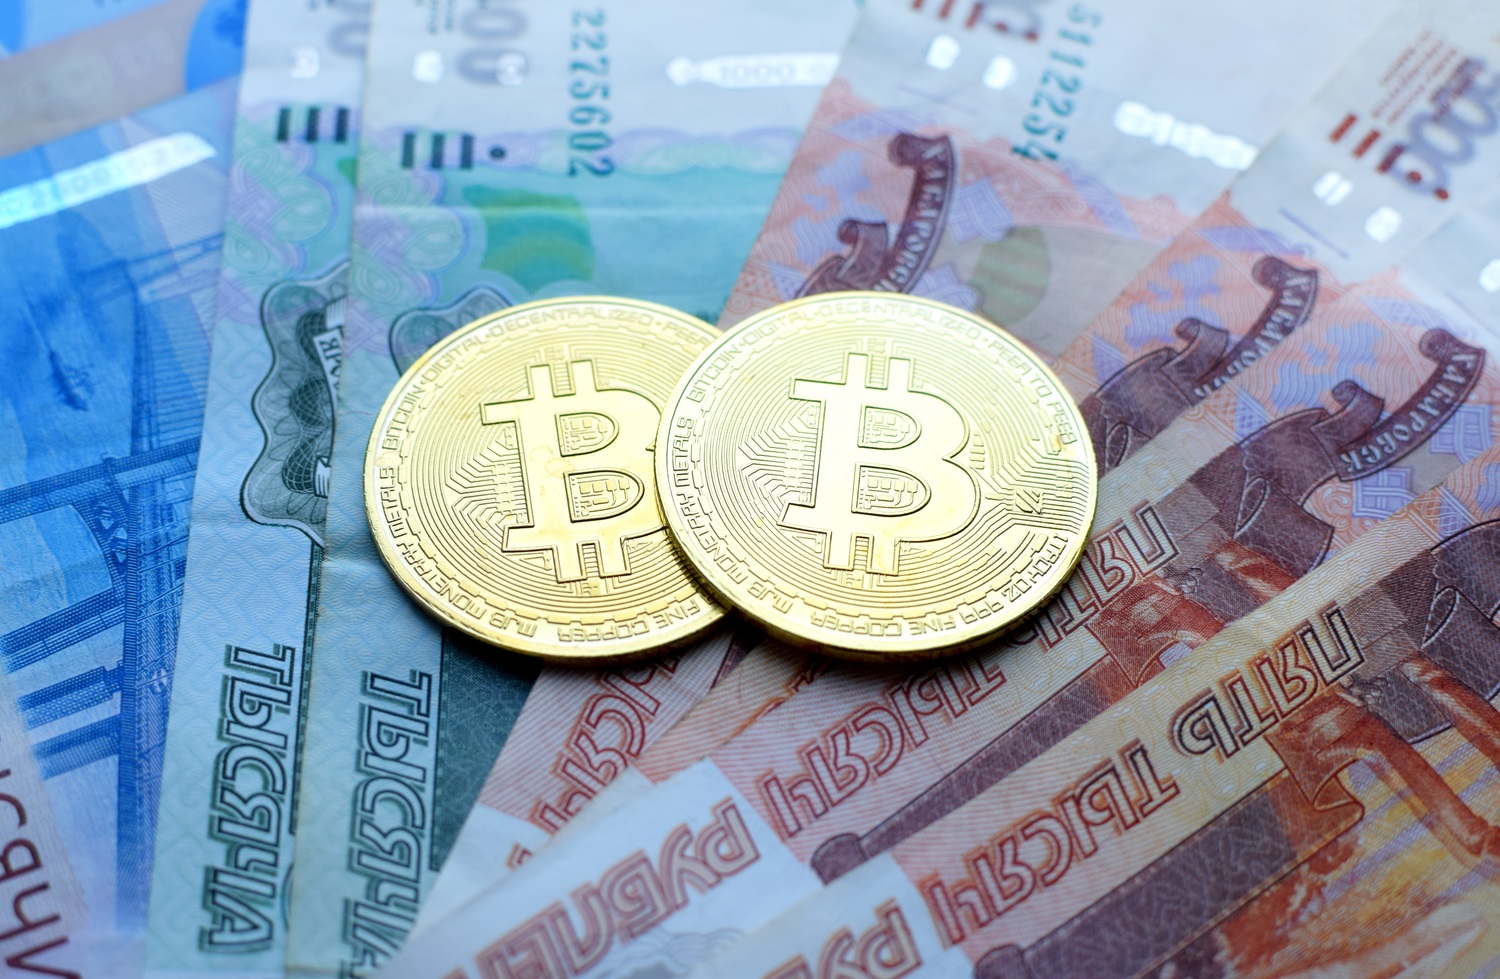 Metal tokens intended to represent Bitcoin rest on a selection of Russian ruble banknotes.